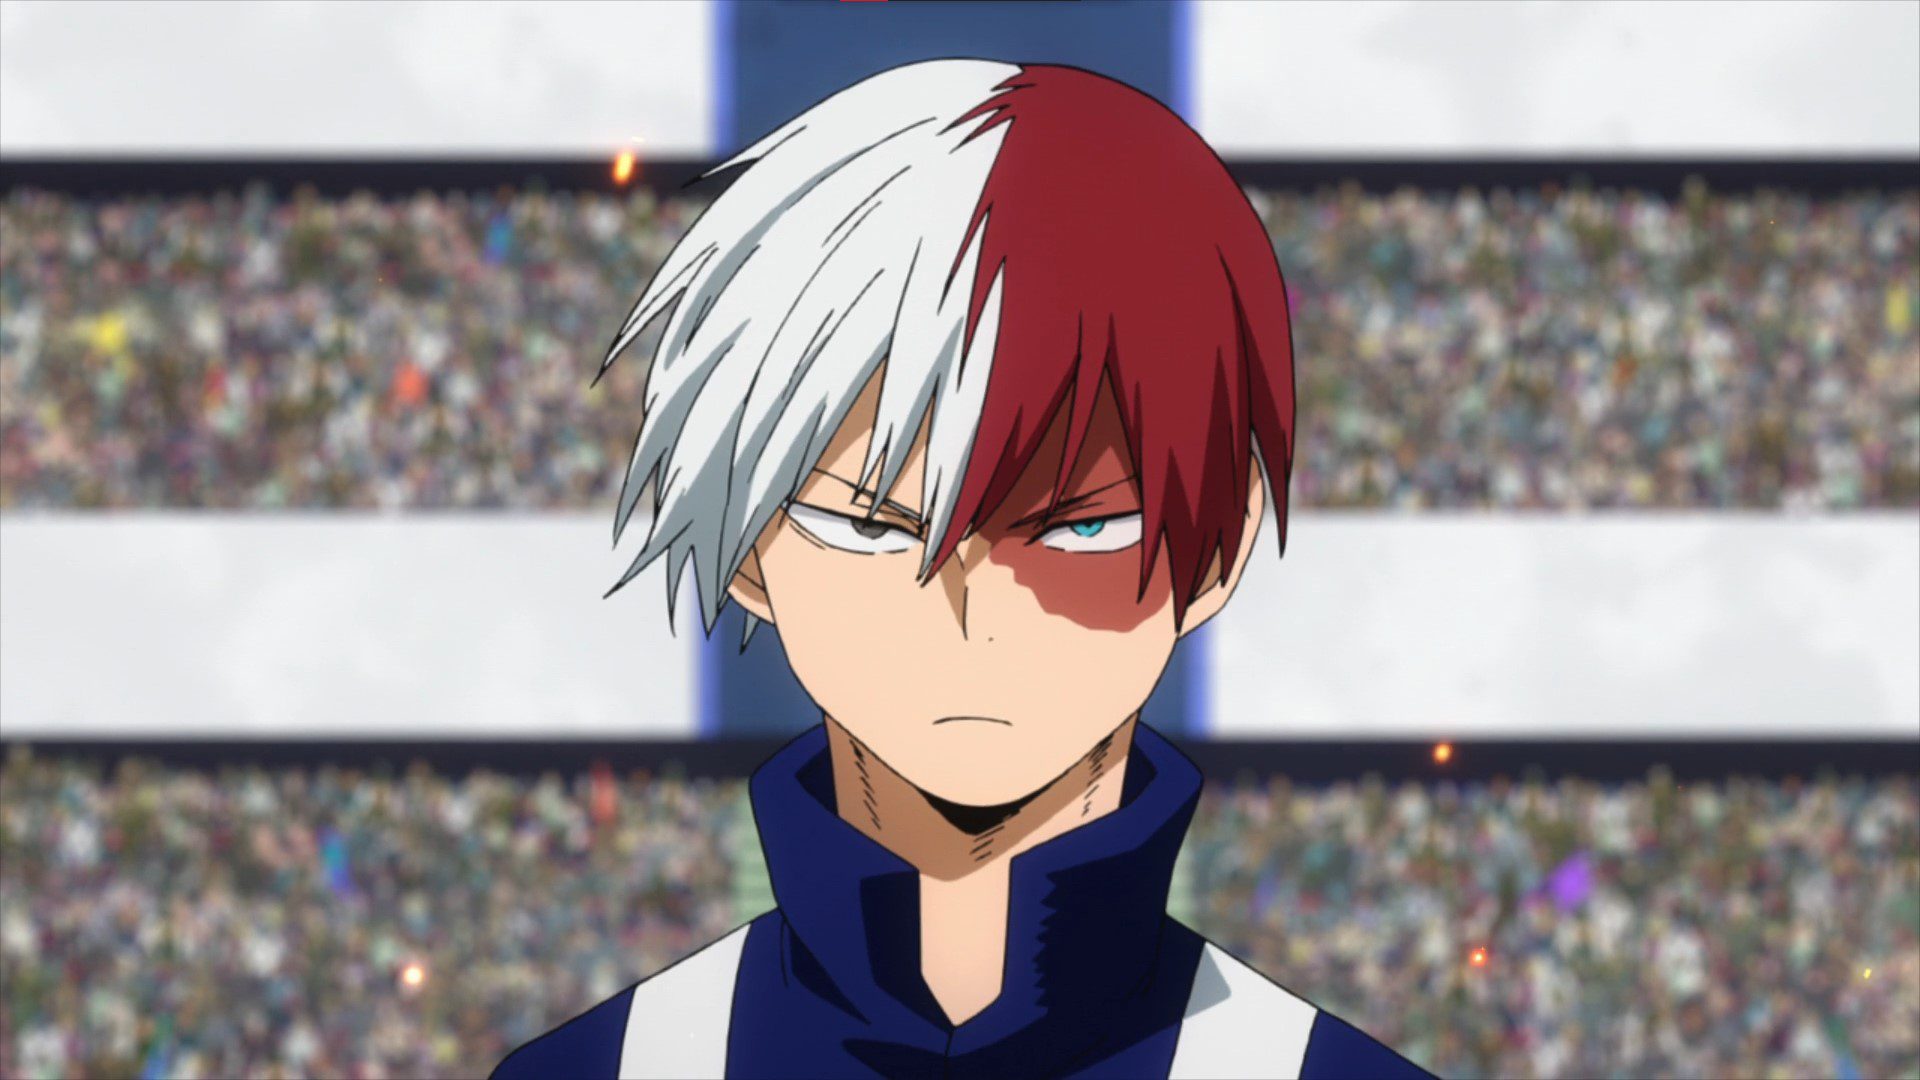 What Anime Is Todoroki From? All About The Character & The Anime